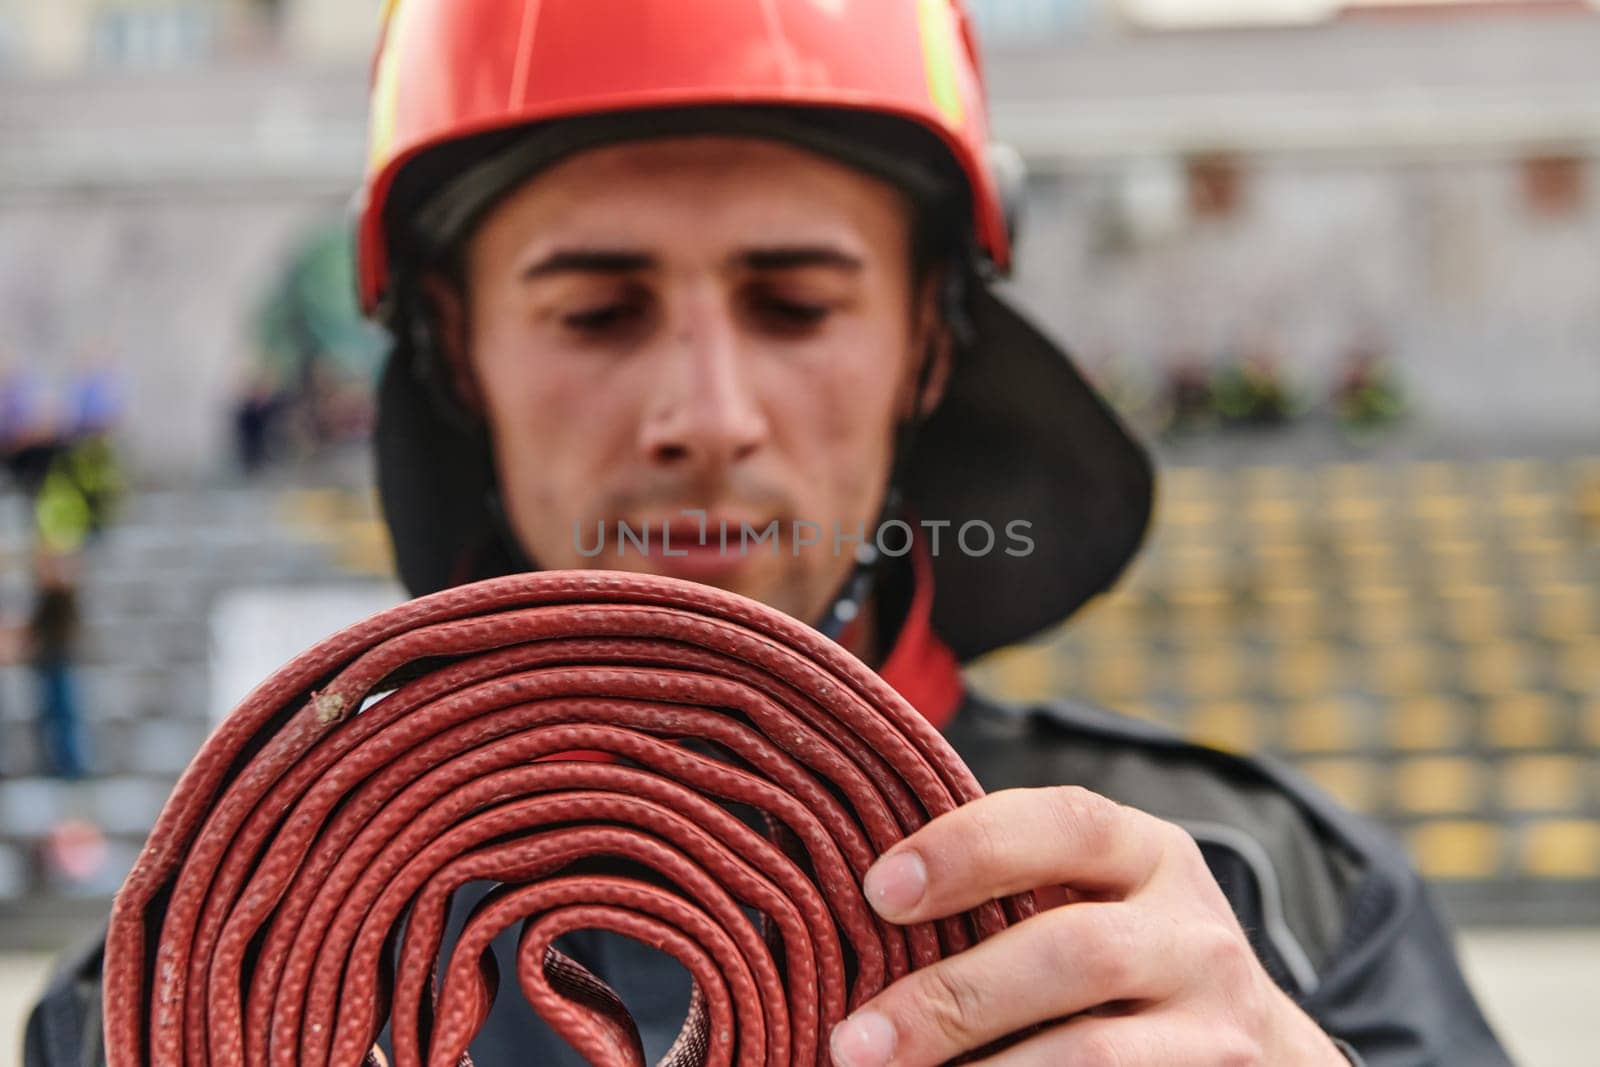 A dedicated firefighter meticulously coils the fire hose after successfully extinguishing a blaze, showcasing the critical post-incident responsibilities.